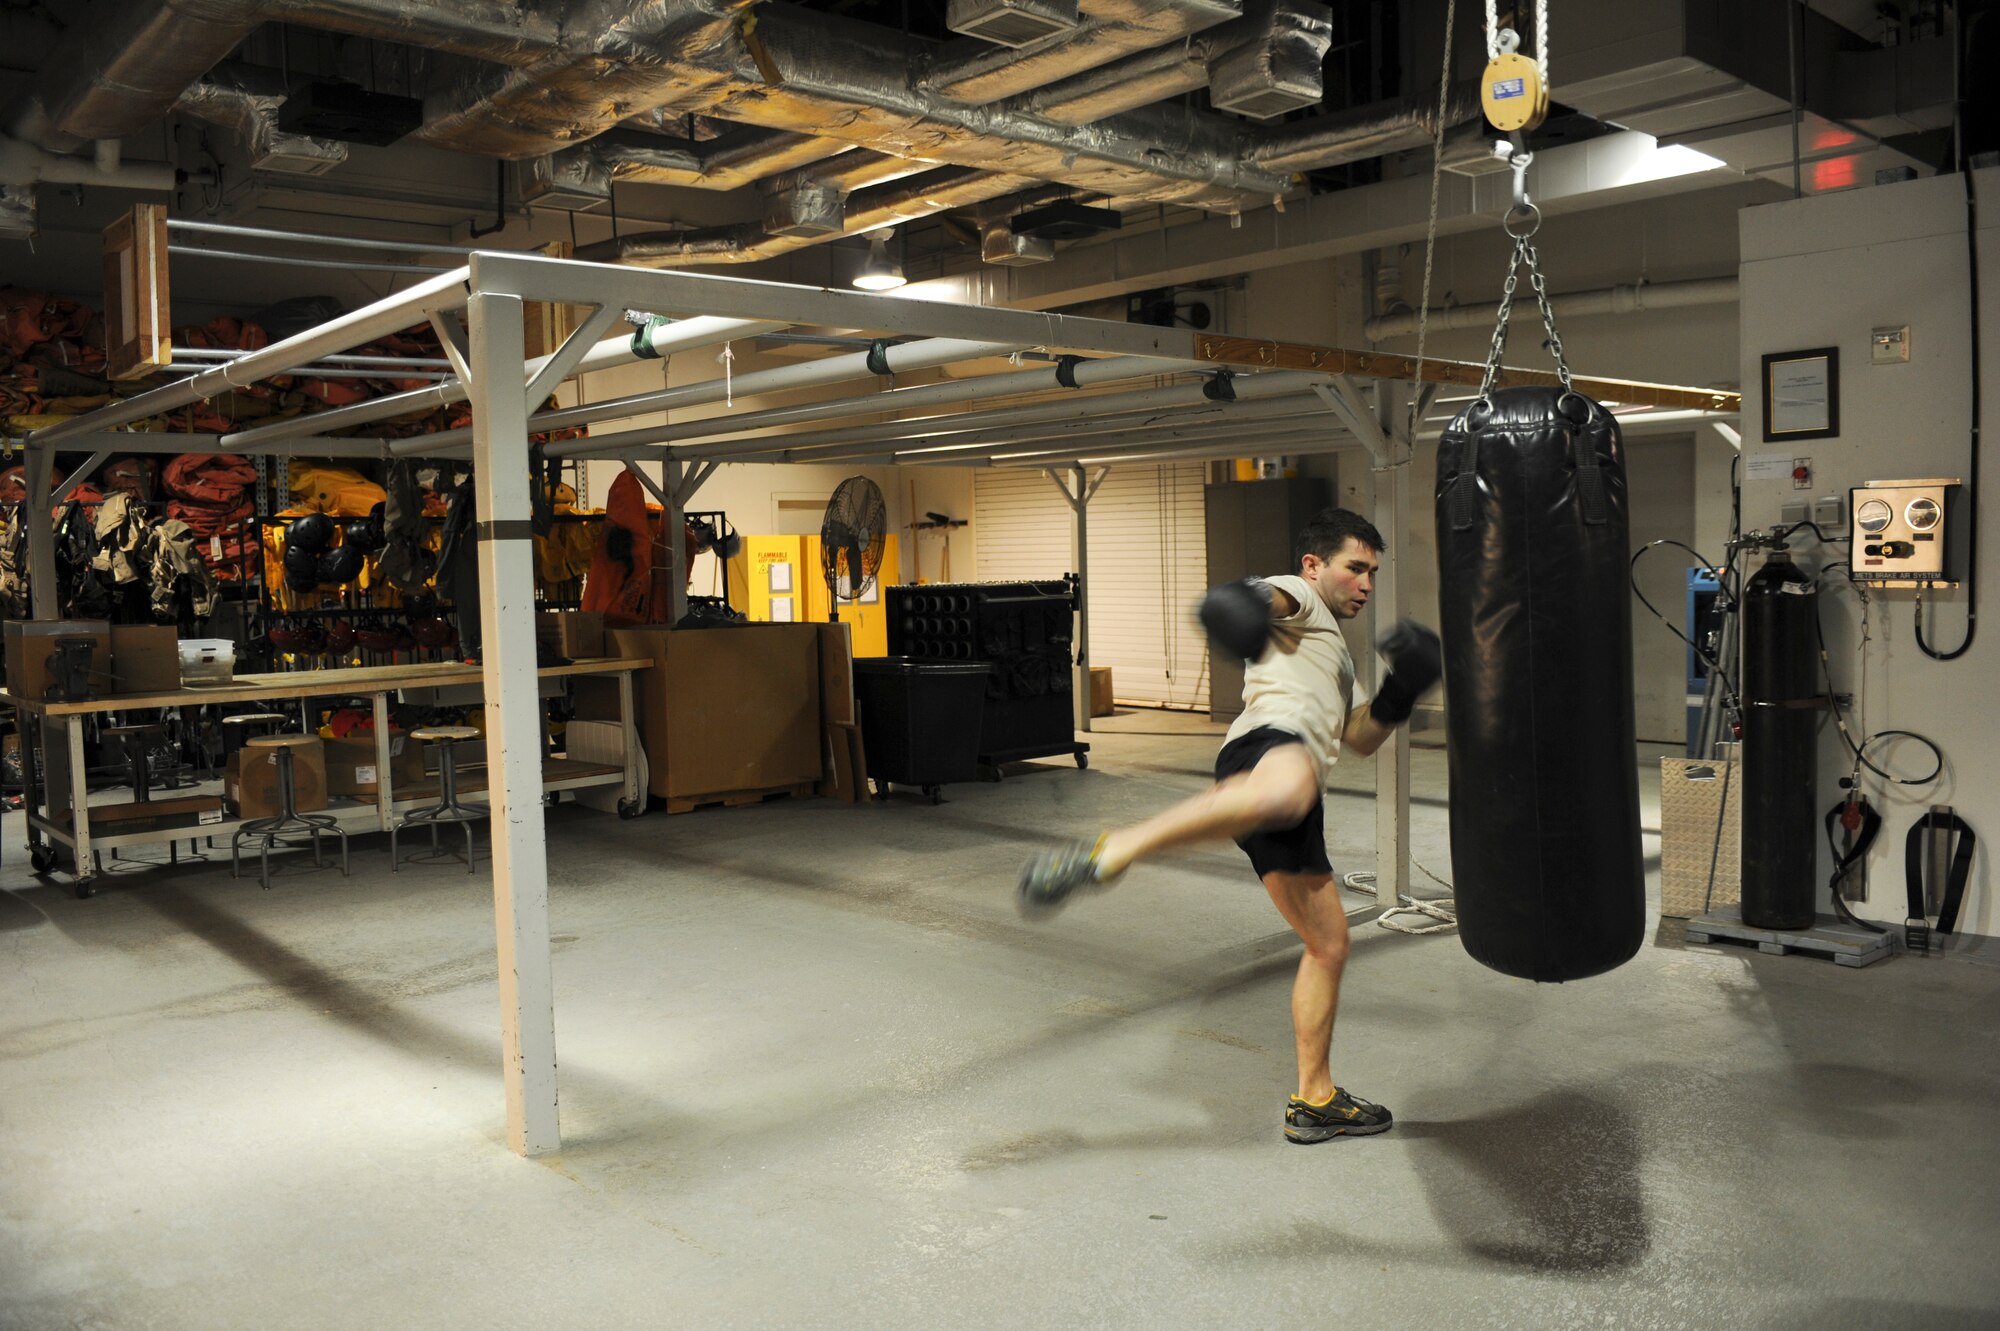 Senior Airman Andrew Lawrence, 66th Training Squadron, water survival instructor, practices kicks and strikes at his shop April 26 in preparation of his mixed martial arts fight at the Northern Quest Casino April 28. He has been fighting for about three years.  